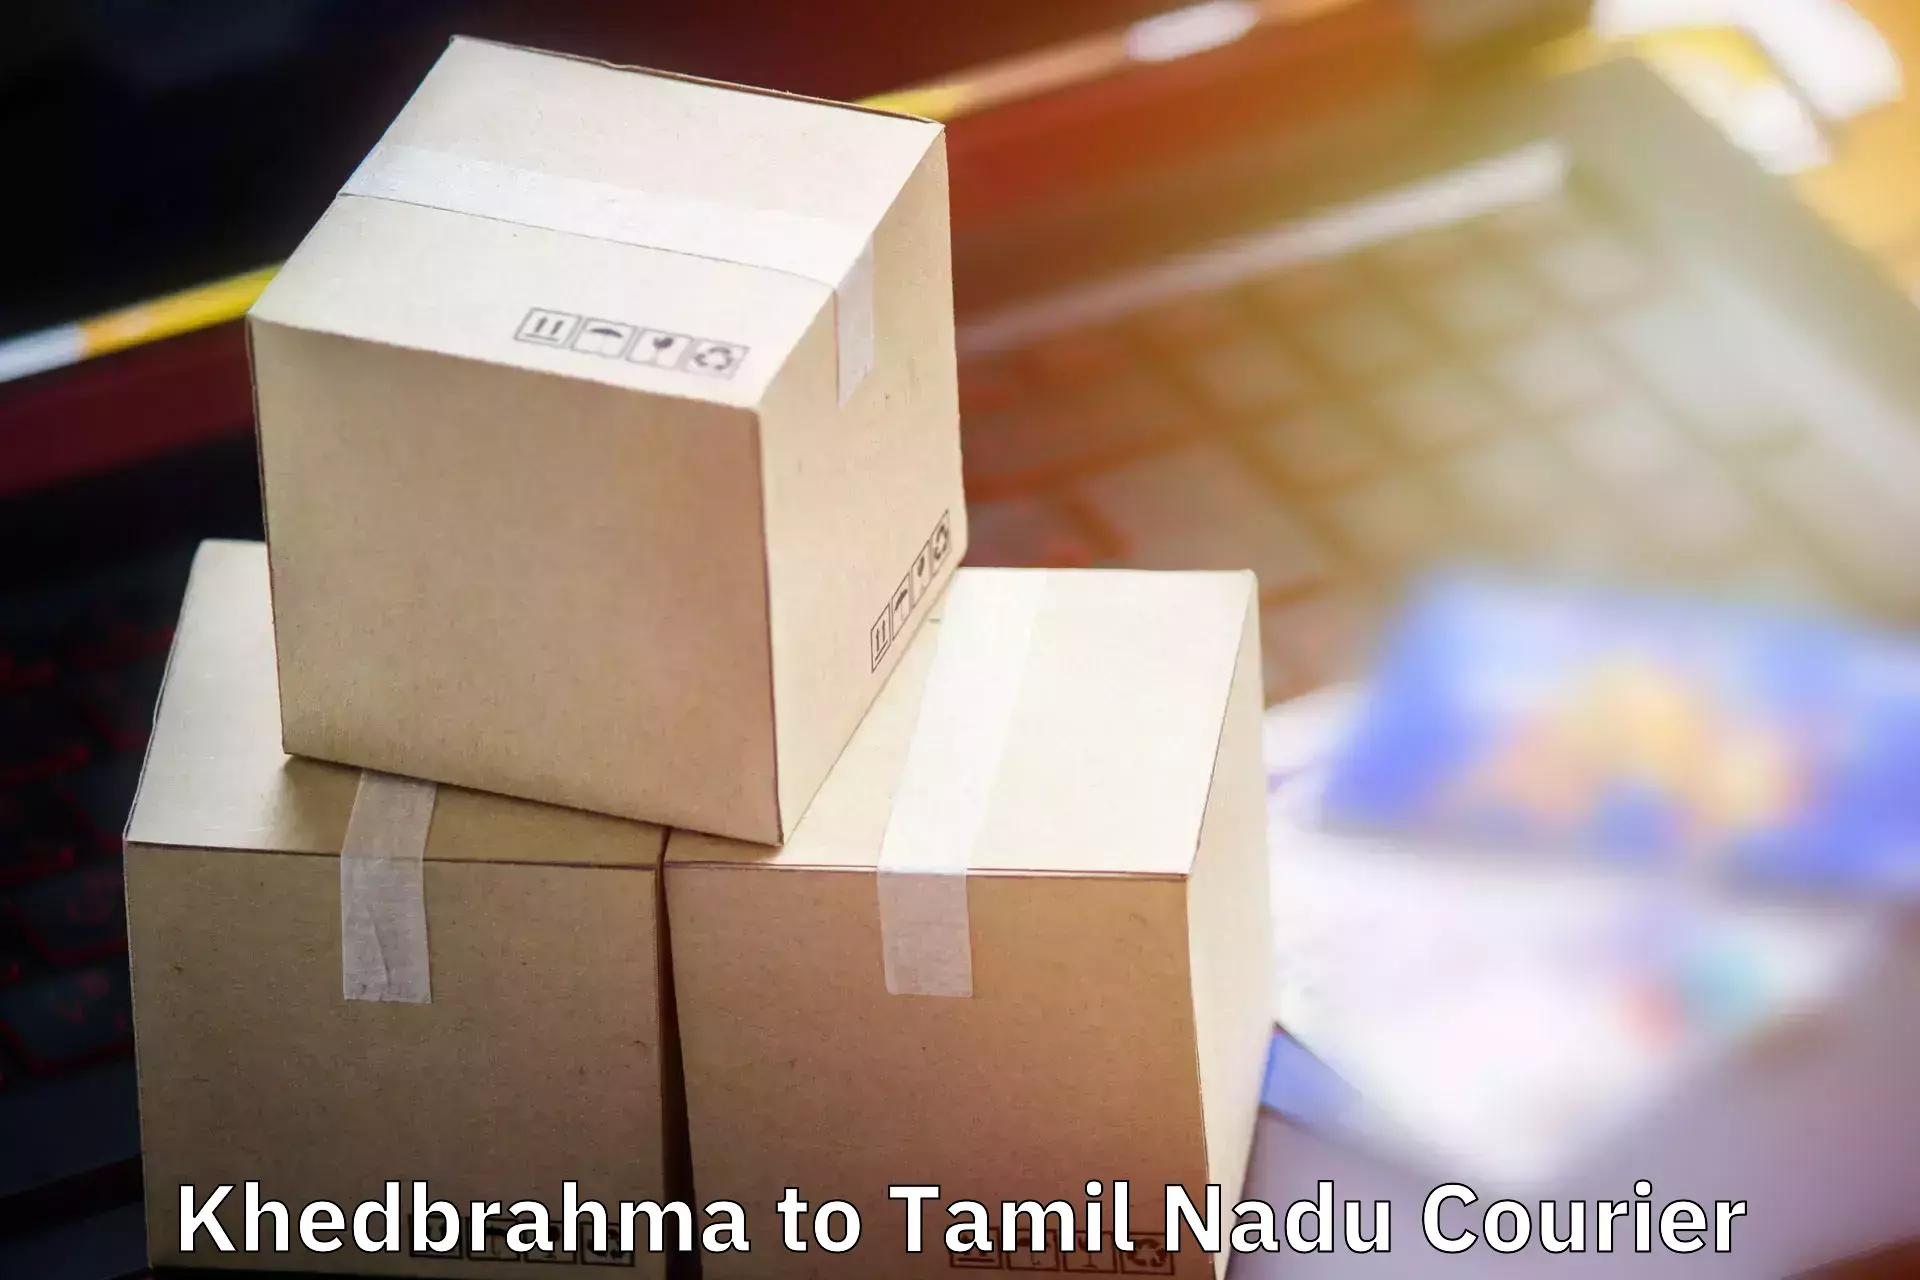 Baggage shipping service Khedbrahma to Vellore